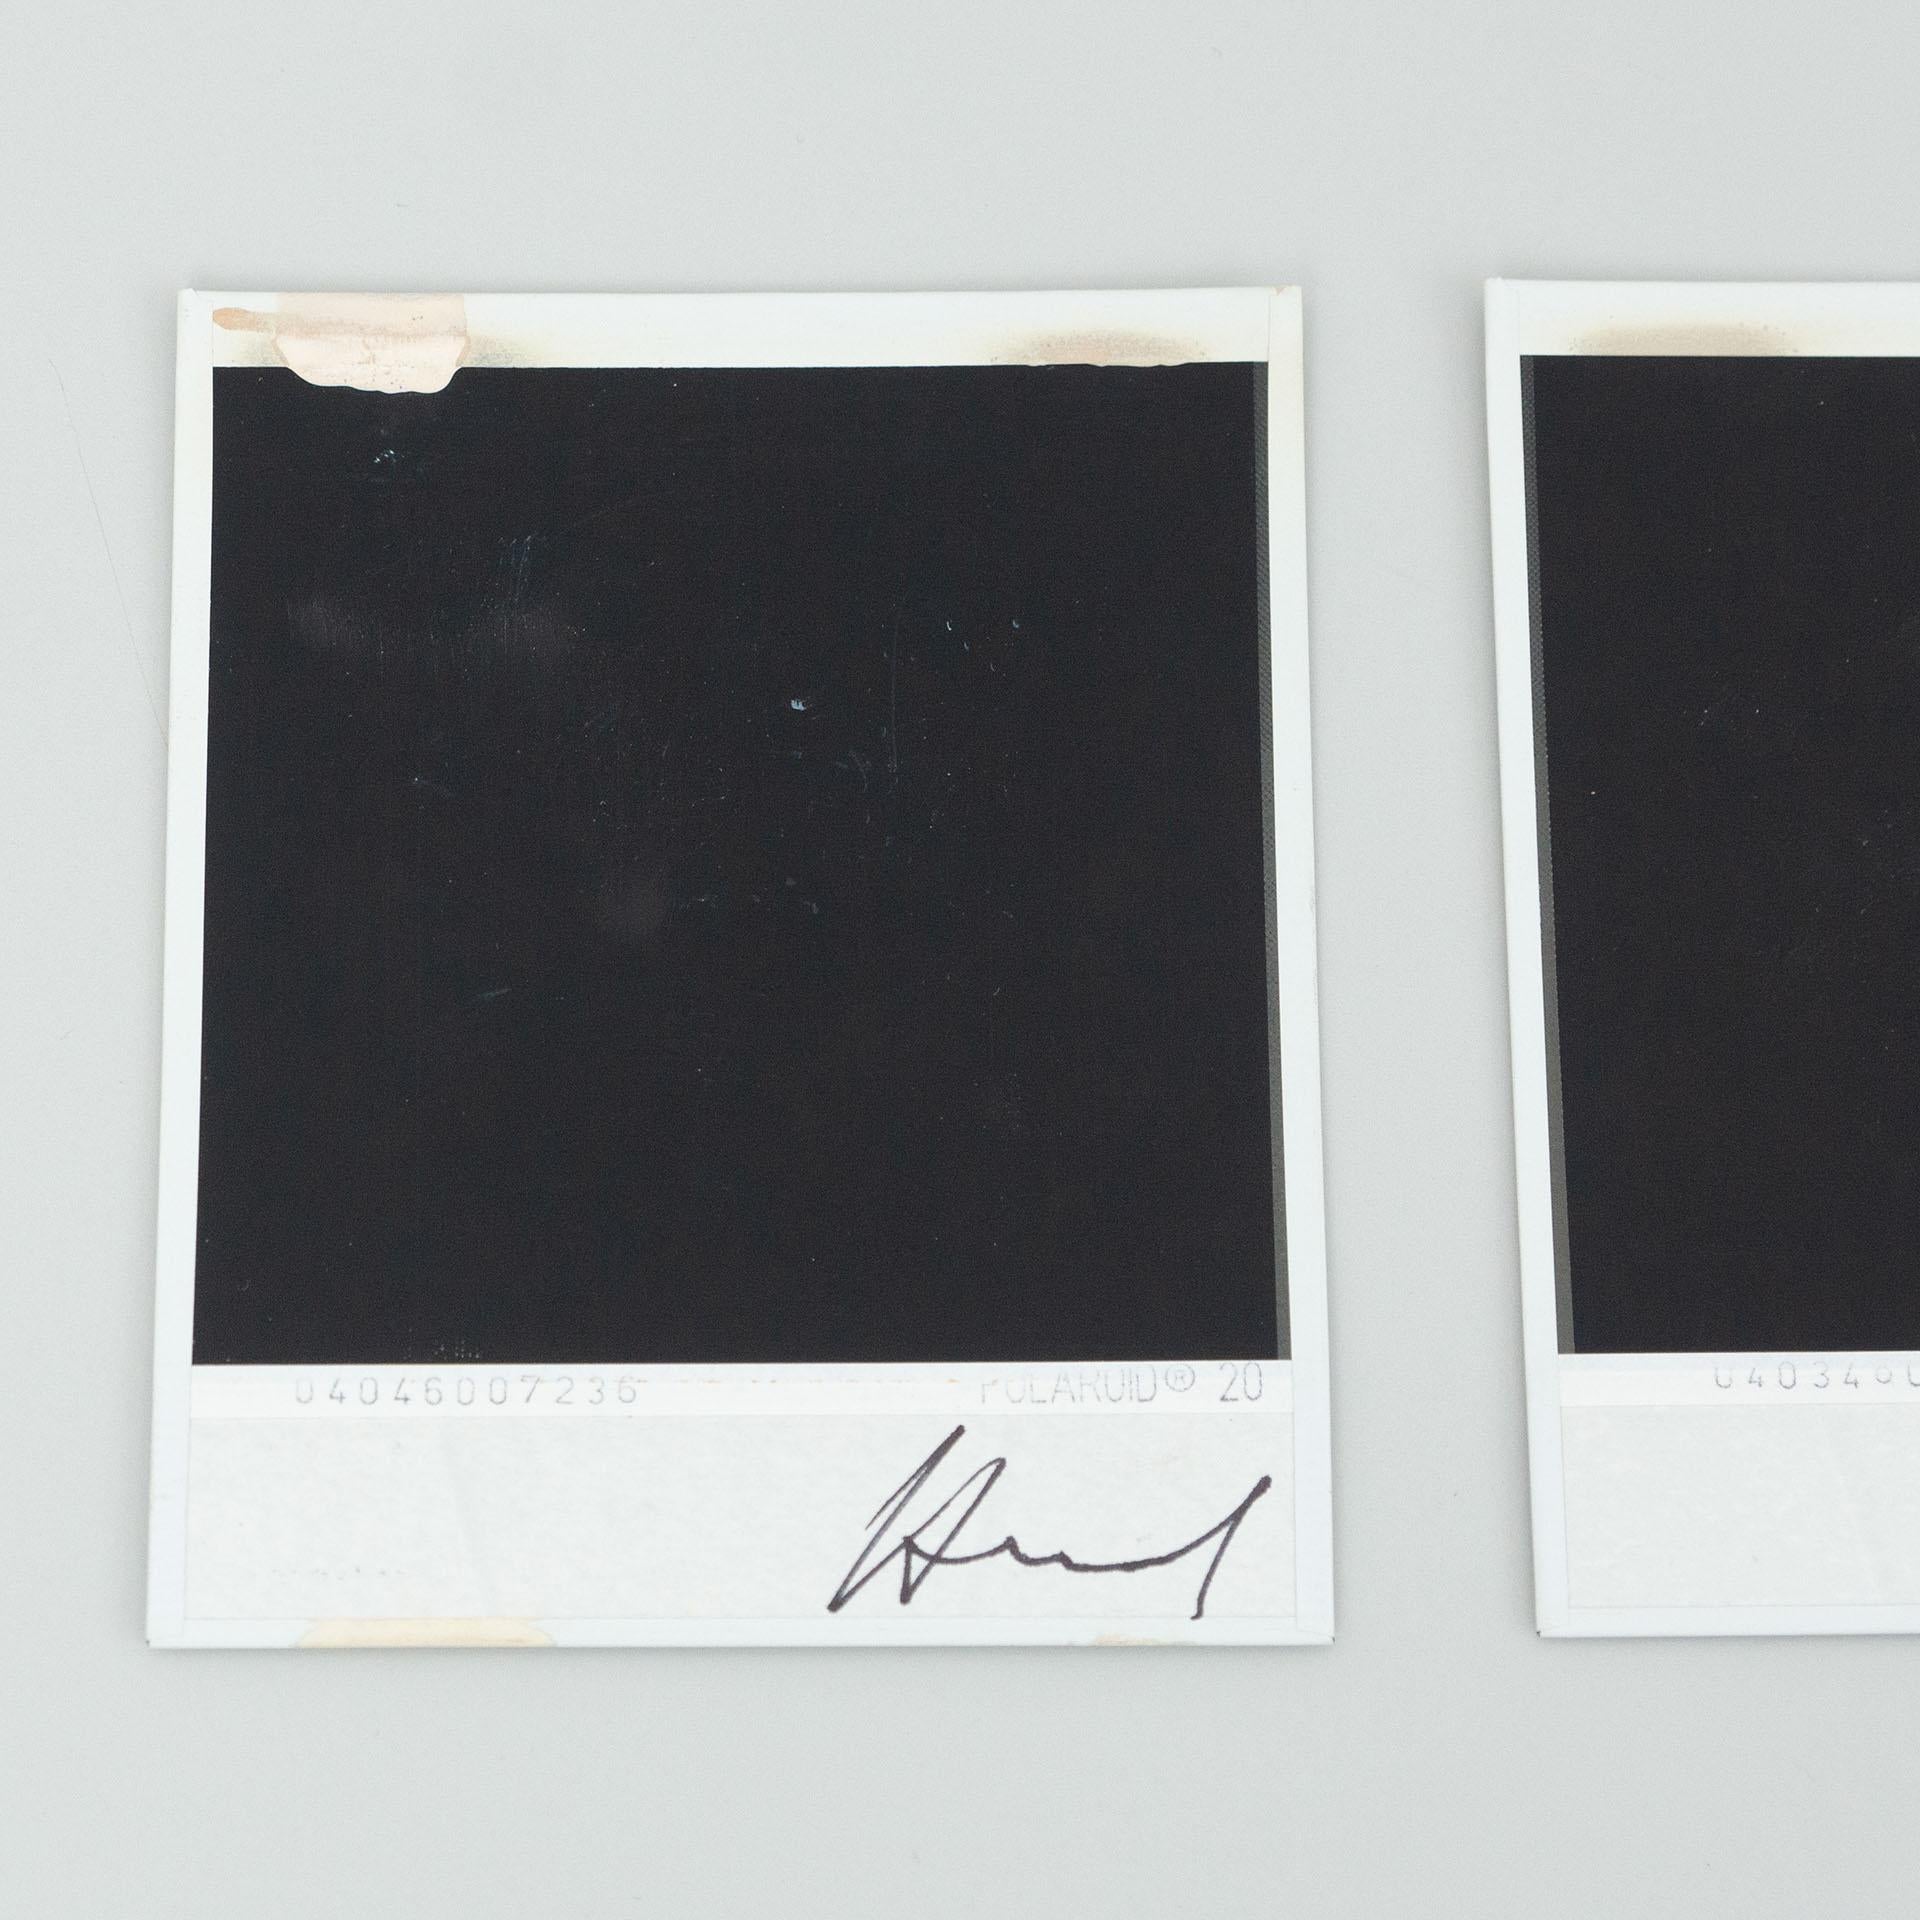 Miquel Arnal Set of Polaroid Photographs In Good Condition For Sale In Barcelona, Barcelona